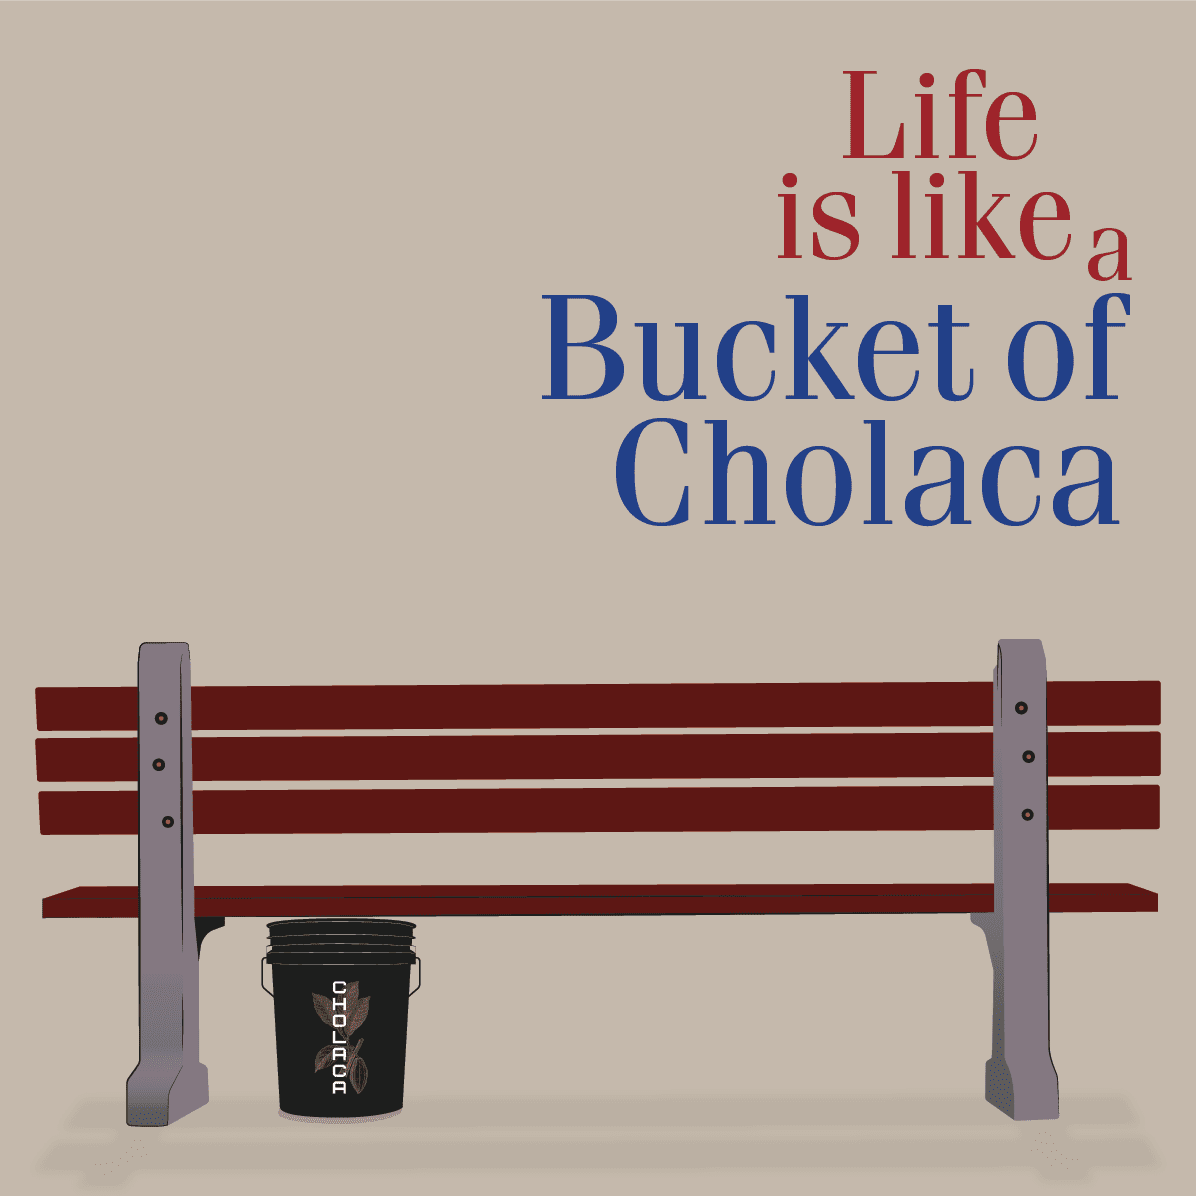 Life is Like a Bucket of Cholaca cover art